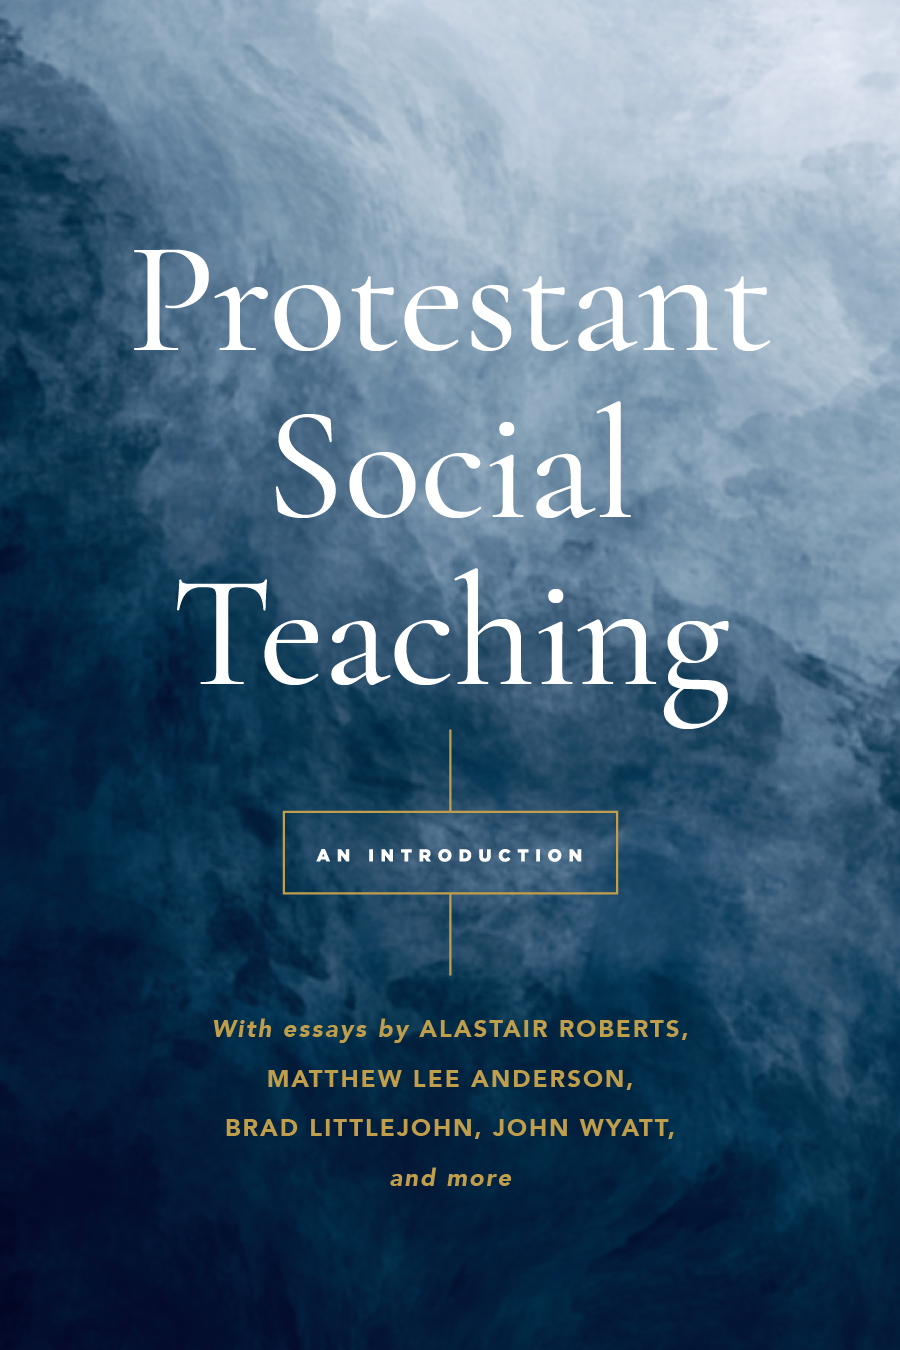 Protestant Social Teaching: An Introduction